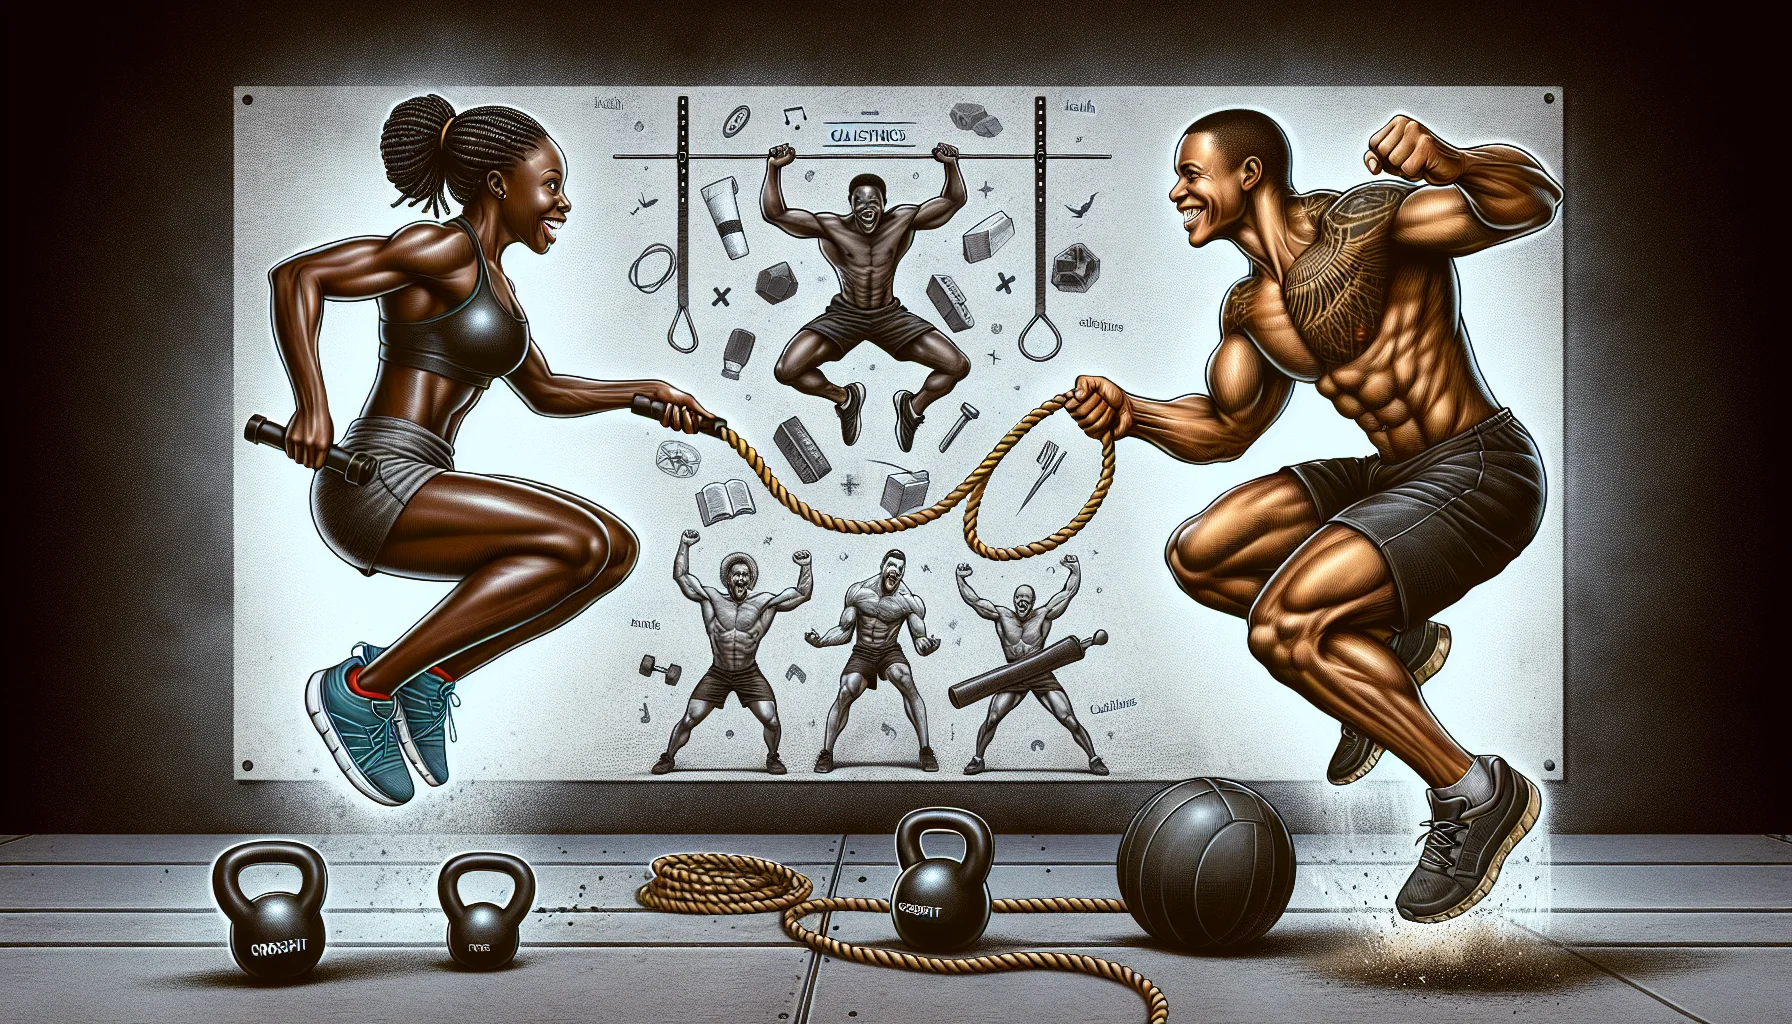 Craft a detailed and humorous image that showcases the friendly rivalry between two fitness activities: CrossFit and Calisthenics. On one side of the image, depict a strong, dedicated African female performing a dynamic CrossFit routine involving kettlebells and burpees. Contrast this with a muscular European male, performing a gravity-defying Calisthenics routine on the other side of the image, with incredible balance and strength. In the middle, emphasize a satirical, friendly tug-of-war between the two, using a jump rope. The background should be motivational, filled with symbols of health, discipline and fun, encouraging viewers to engage more in physical activities.